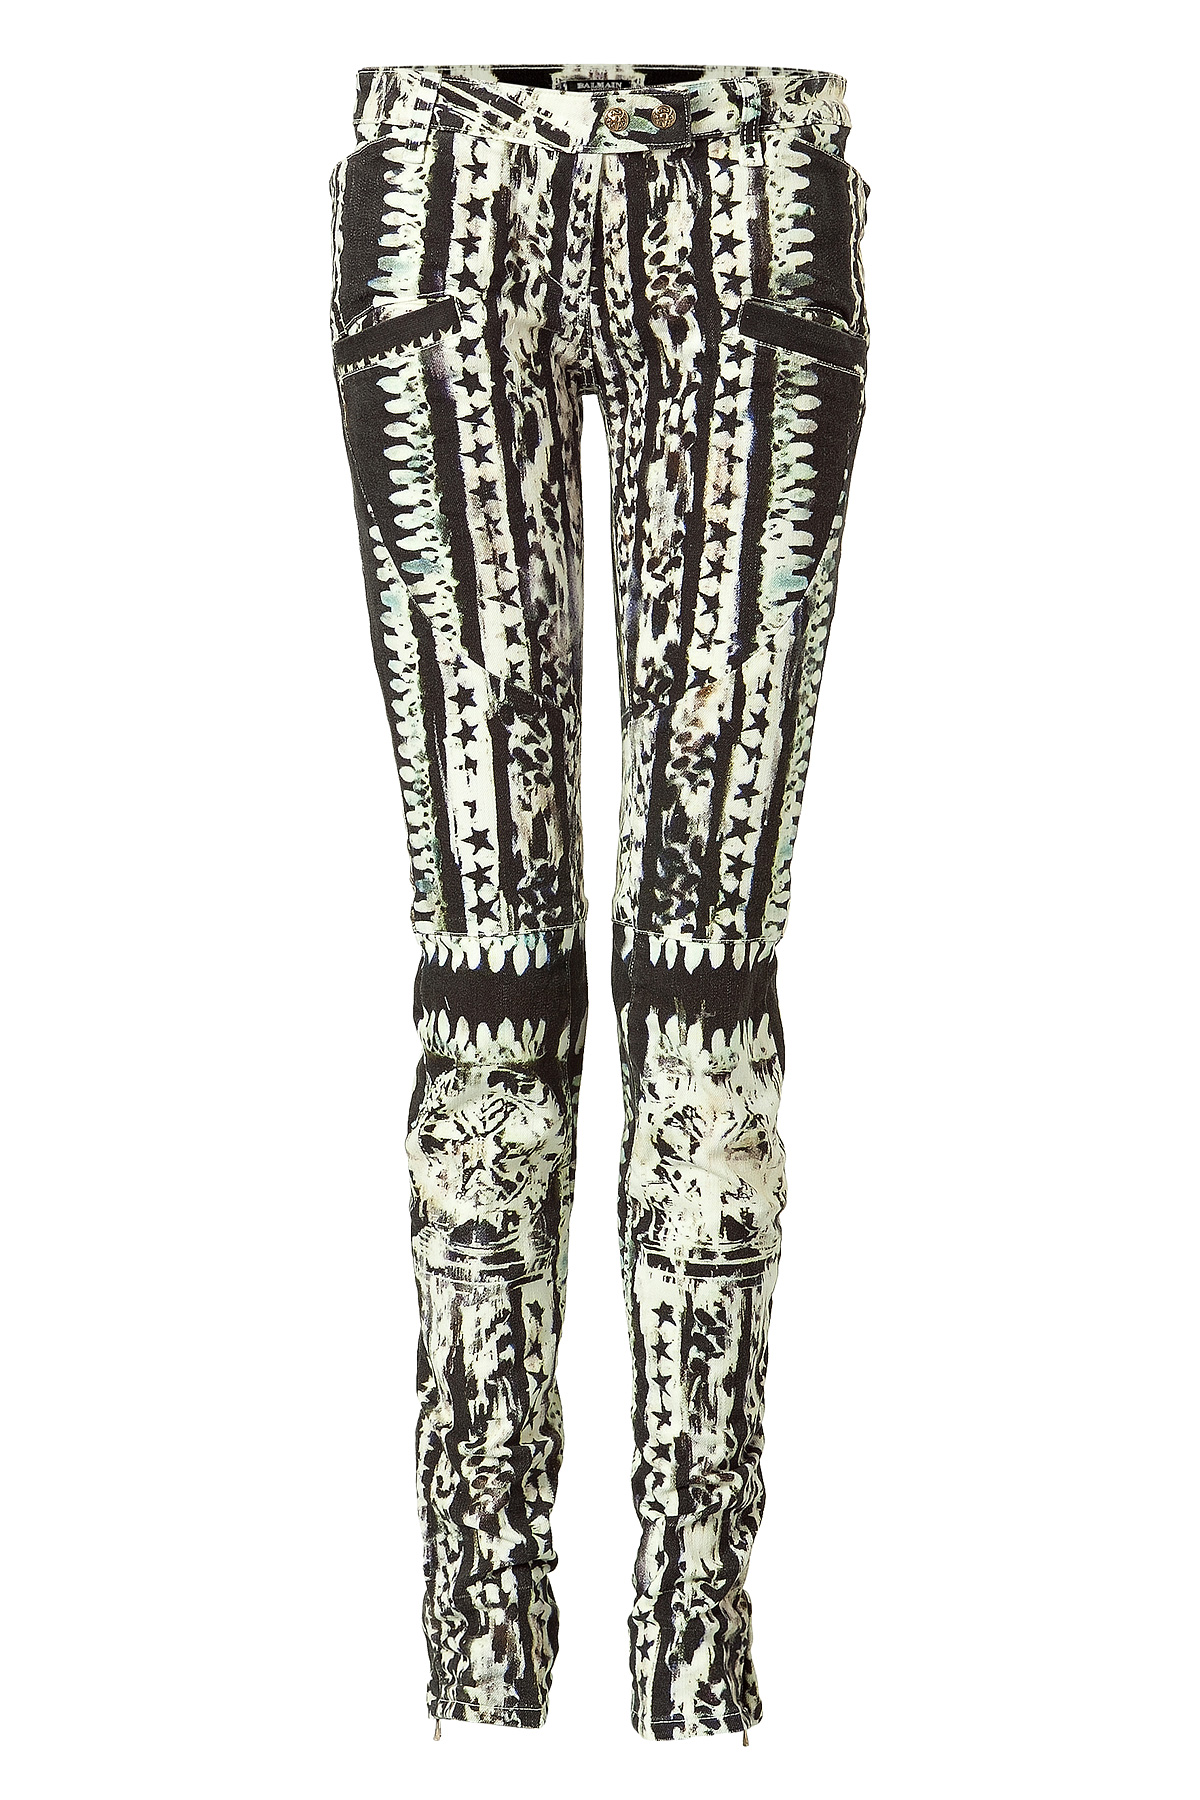 Lyst - Balmain Black and White Patterned Low-rise Pants in Black